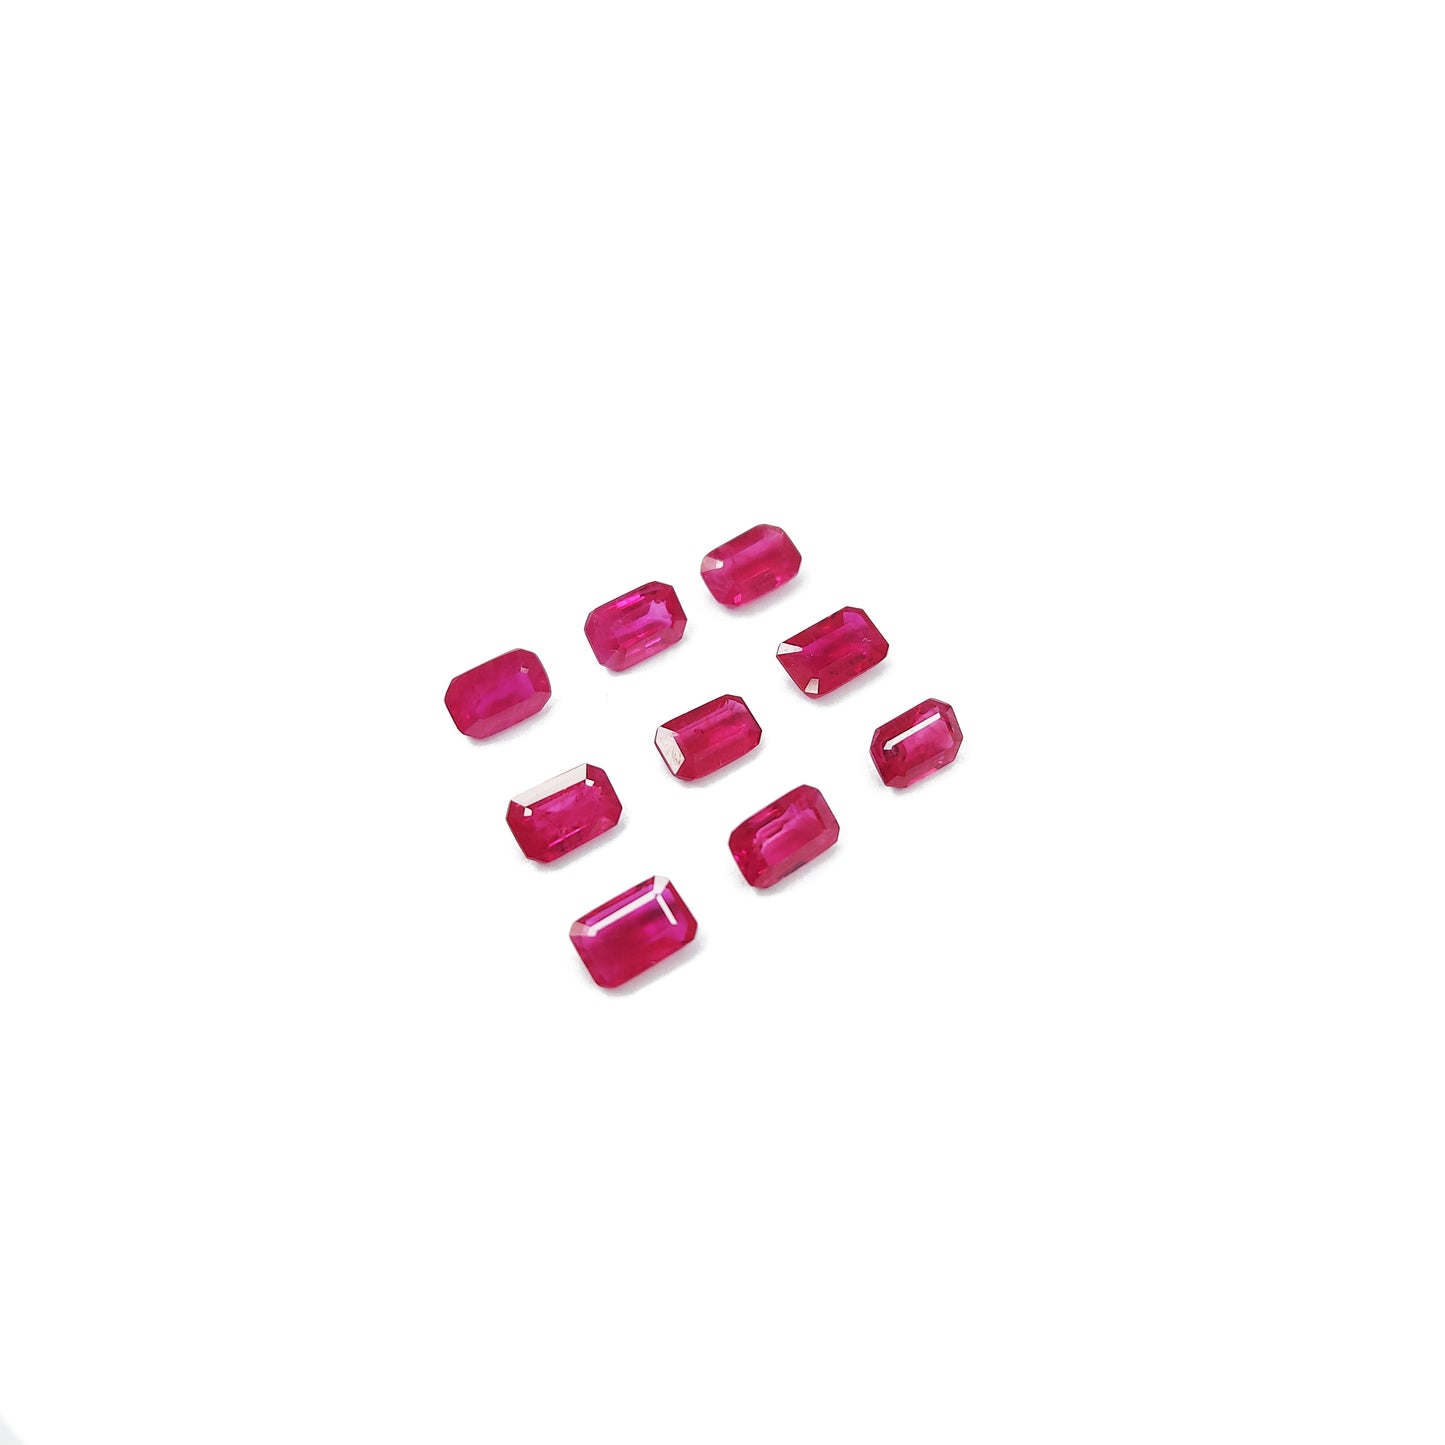 100% Natural Ruby Heated Calibrated Octagons